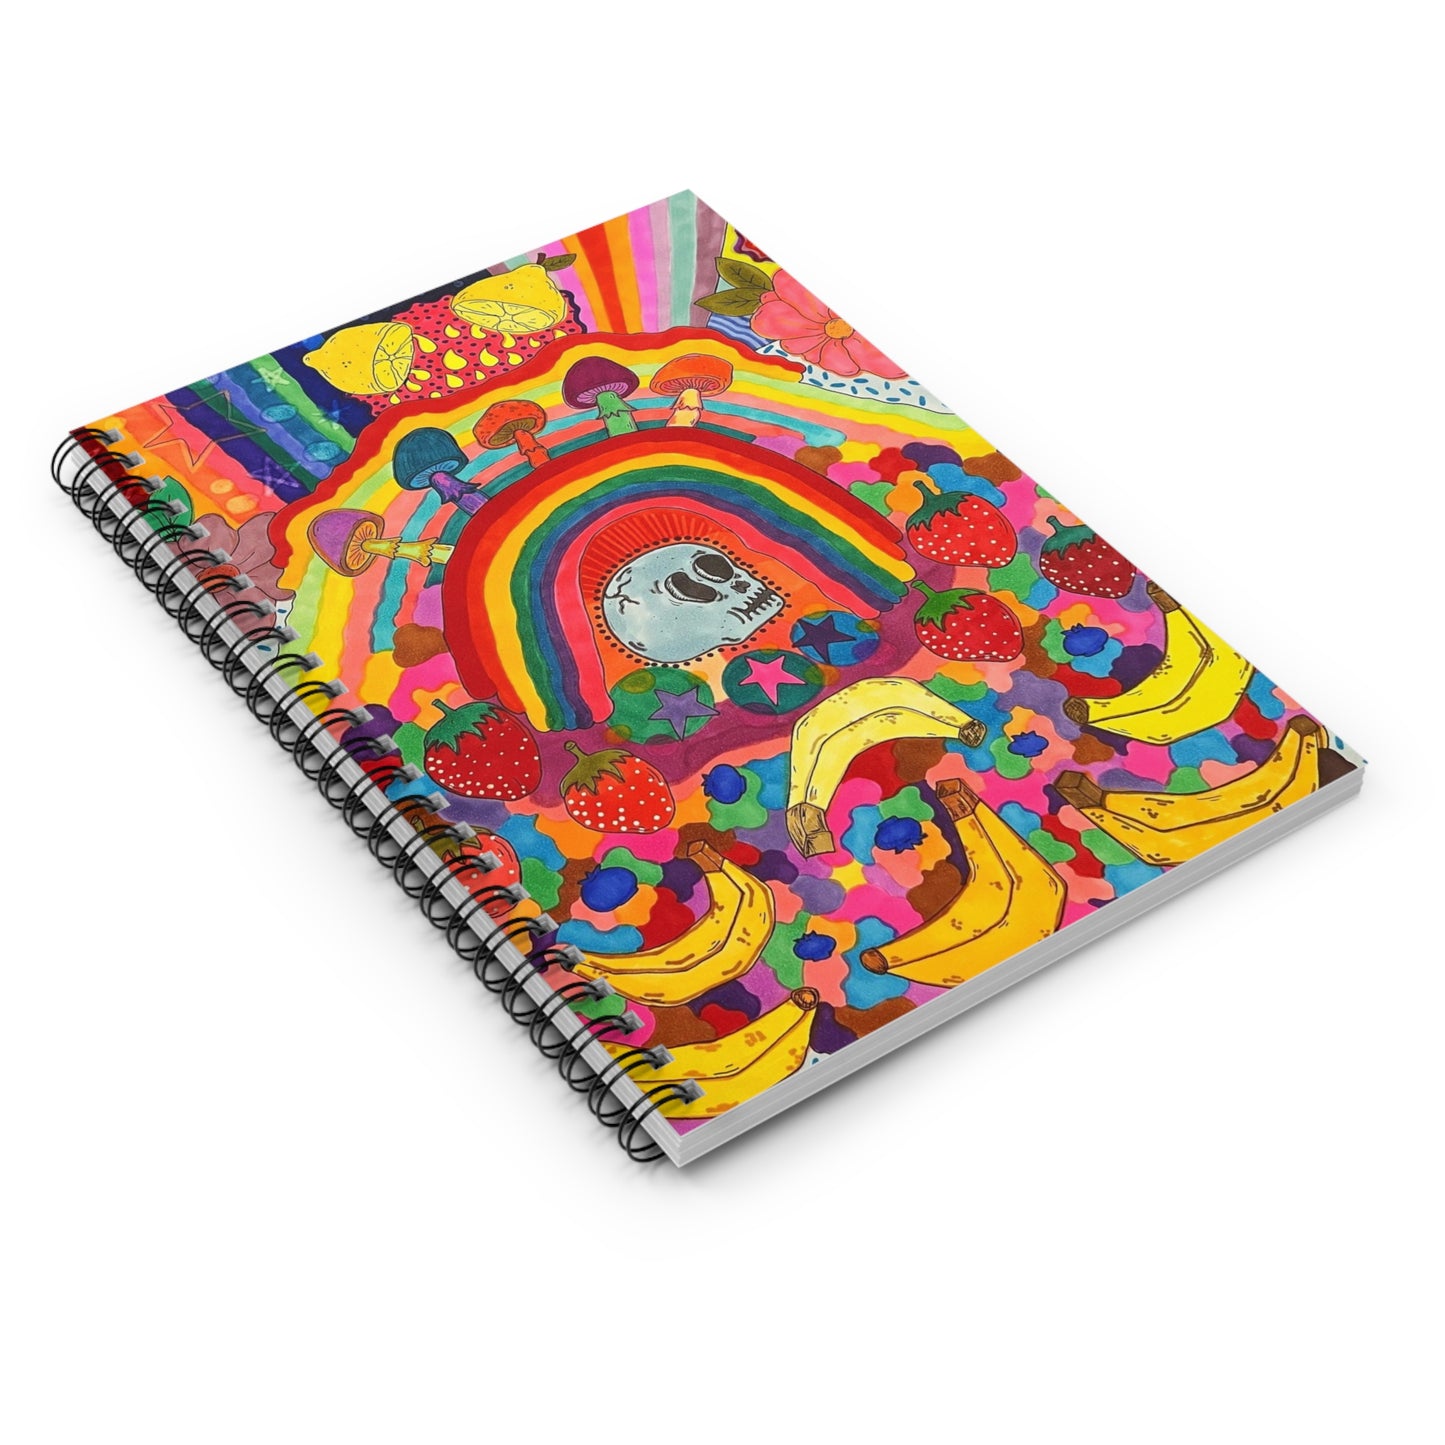 The Joy of life notebook